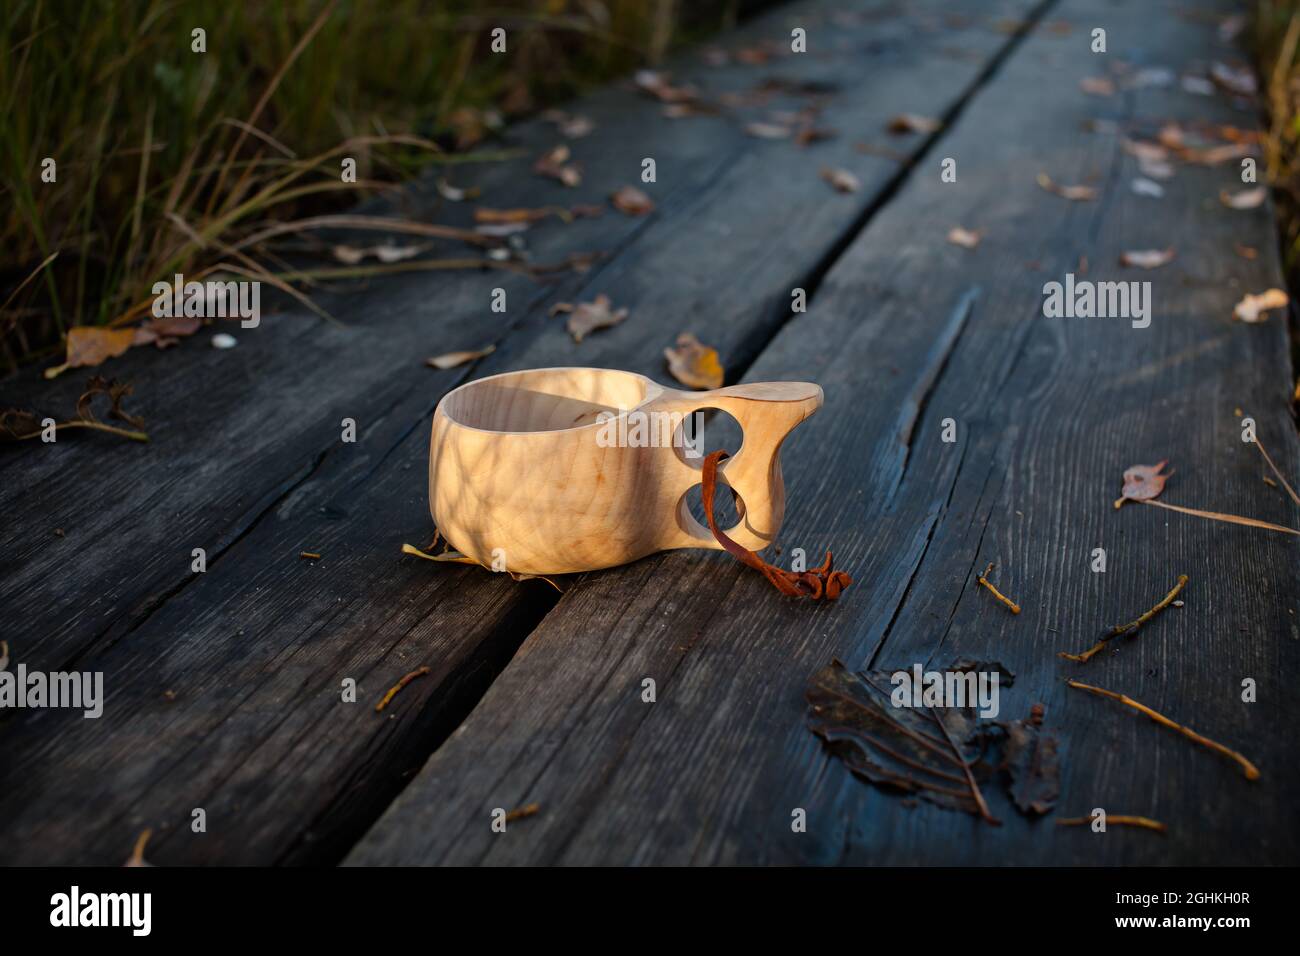 Closeup of an empty wooden cup on duckboards in the fall, with fallen leaves in the background. Stock Photo